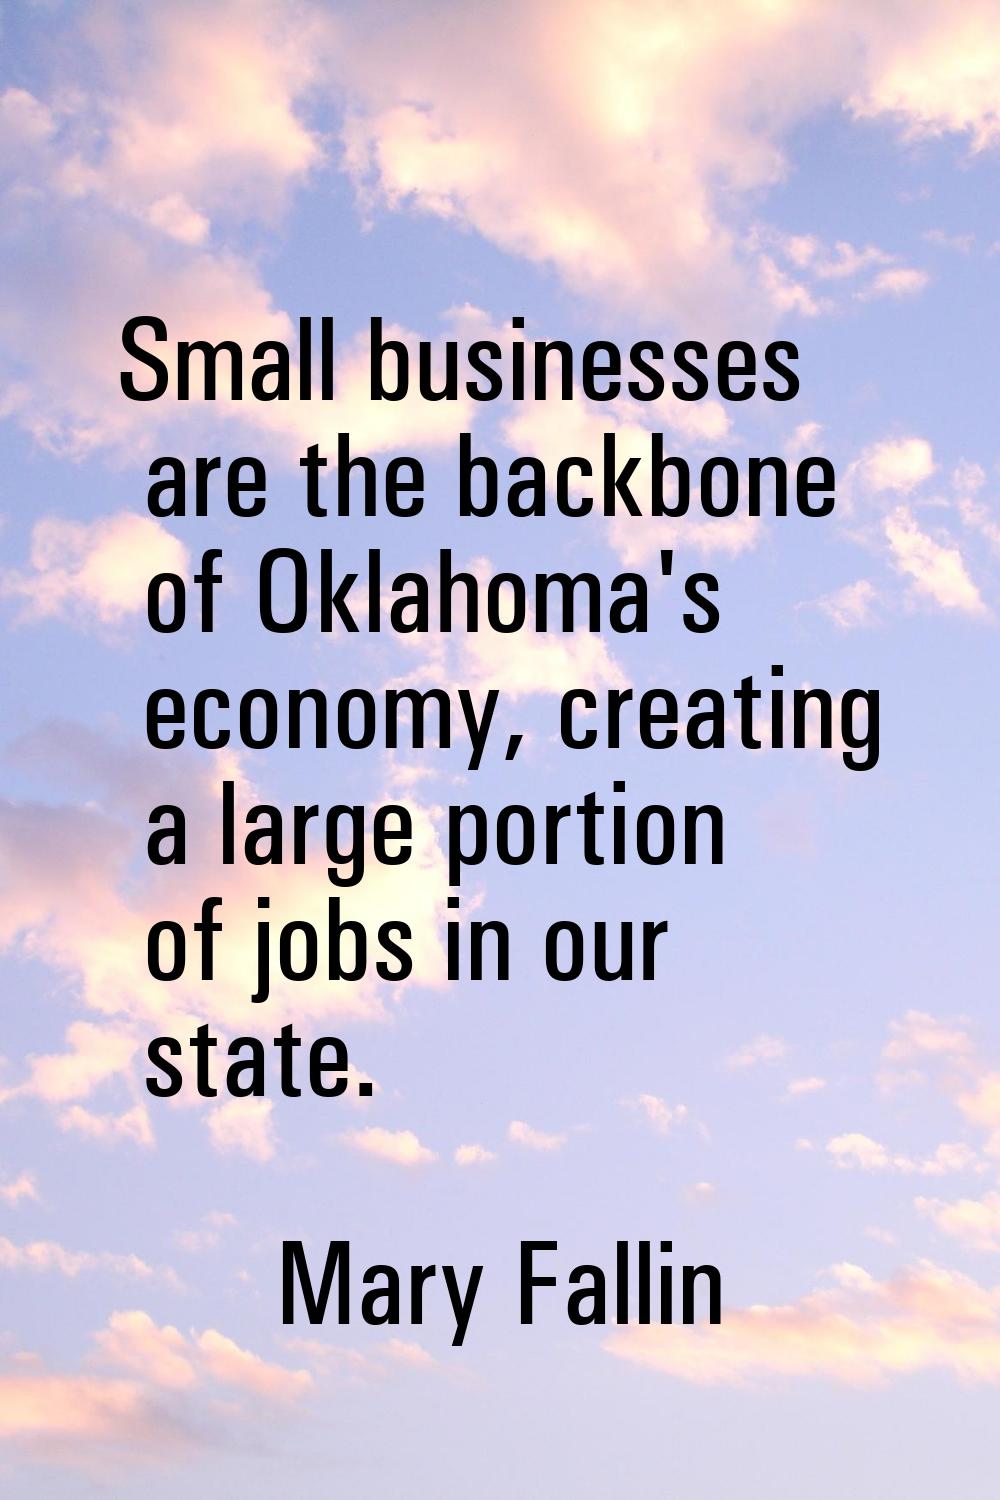 Small businesses are the backbone of Oklahoma's economy, creating a large portion of jobs in our st